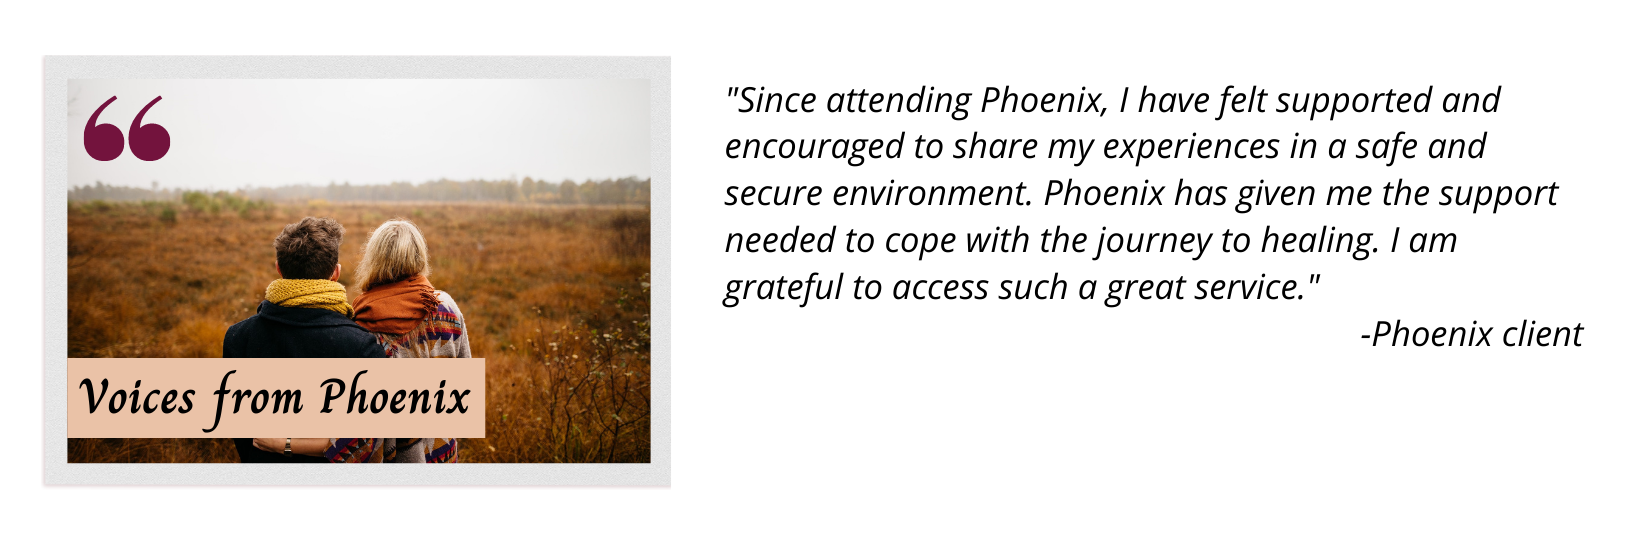 Voices from Phoenix testimonial from phoenix client with picture overset of two women gathering together outside.